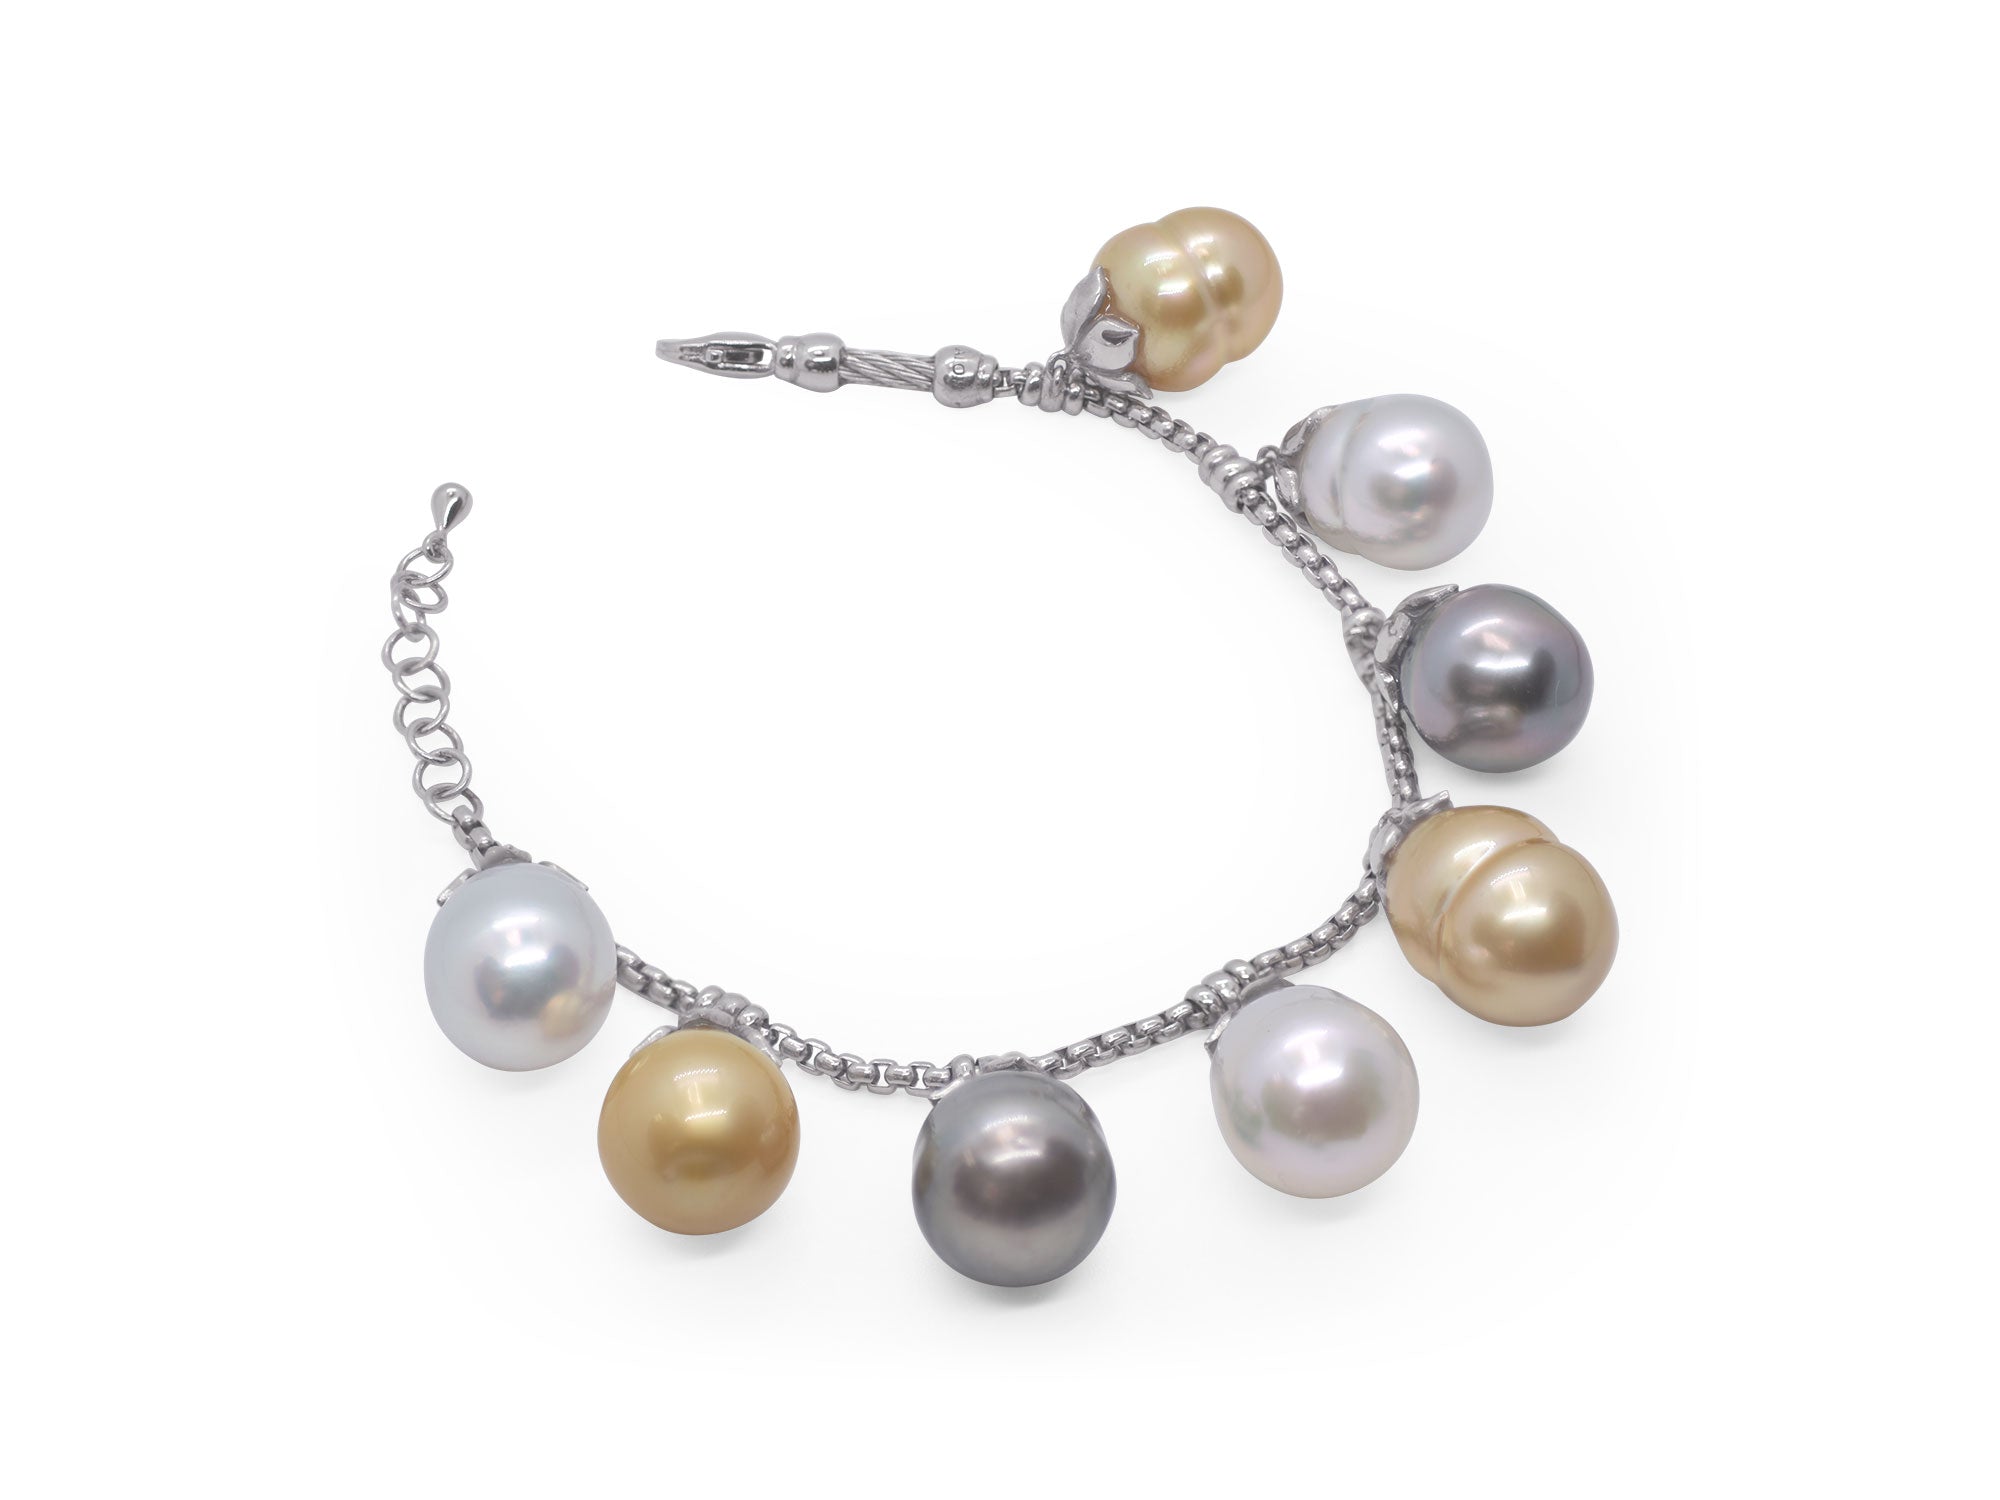 ALOR Black, White & Yellow South Sea Pearl Charm Bracelet with Grey Chain